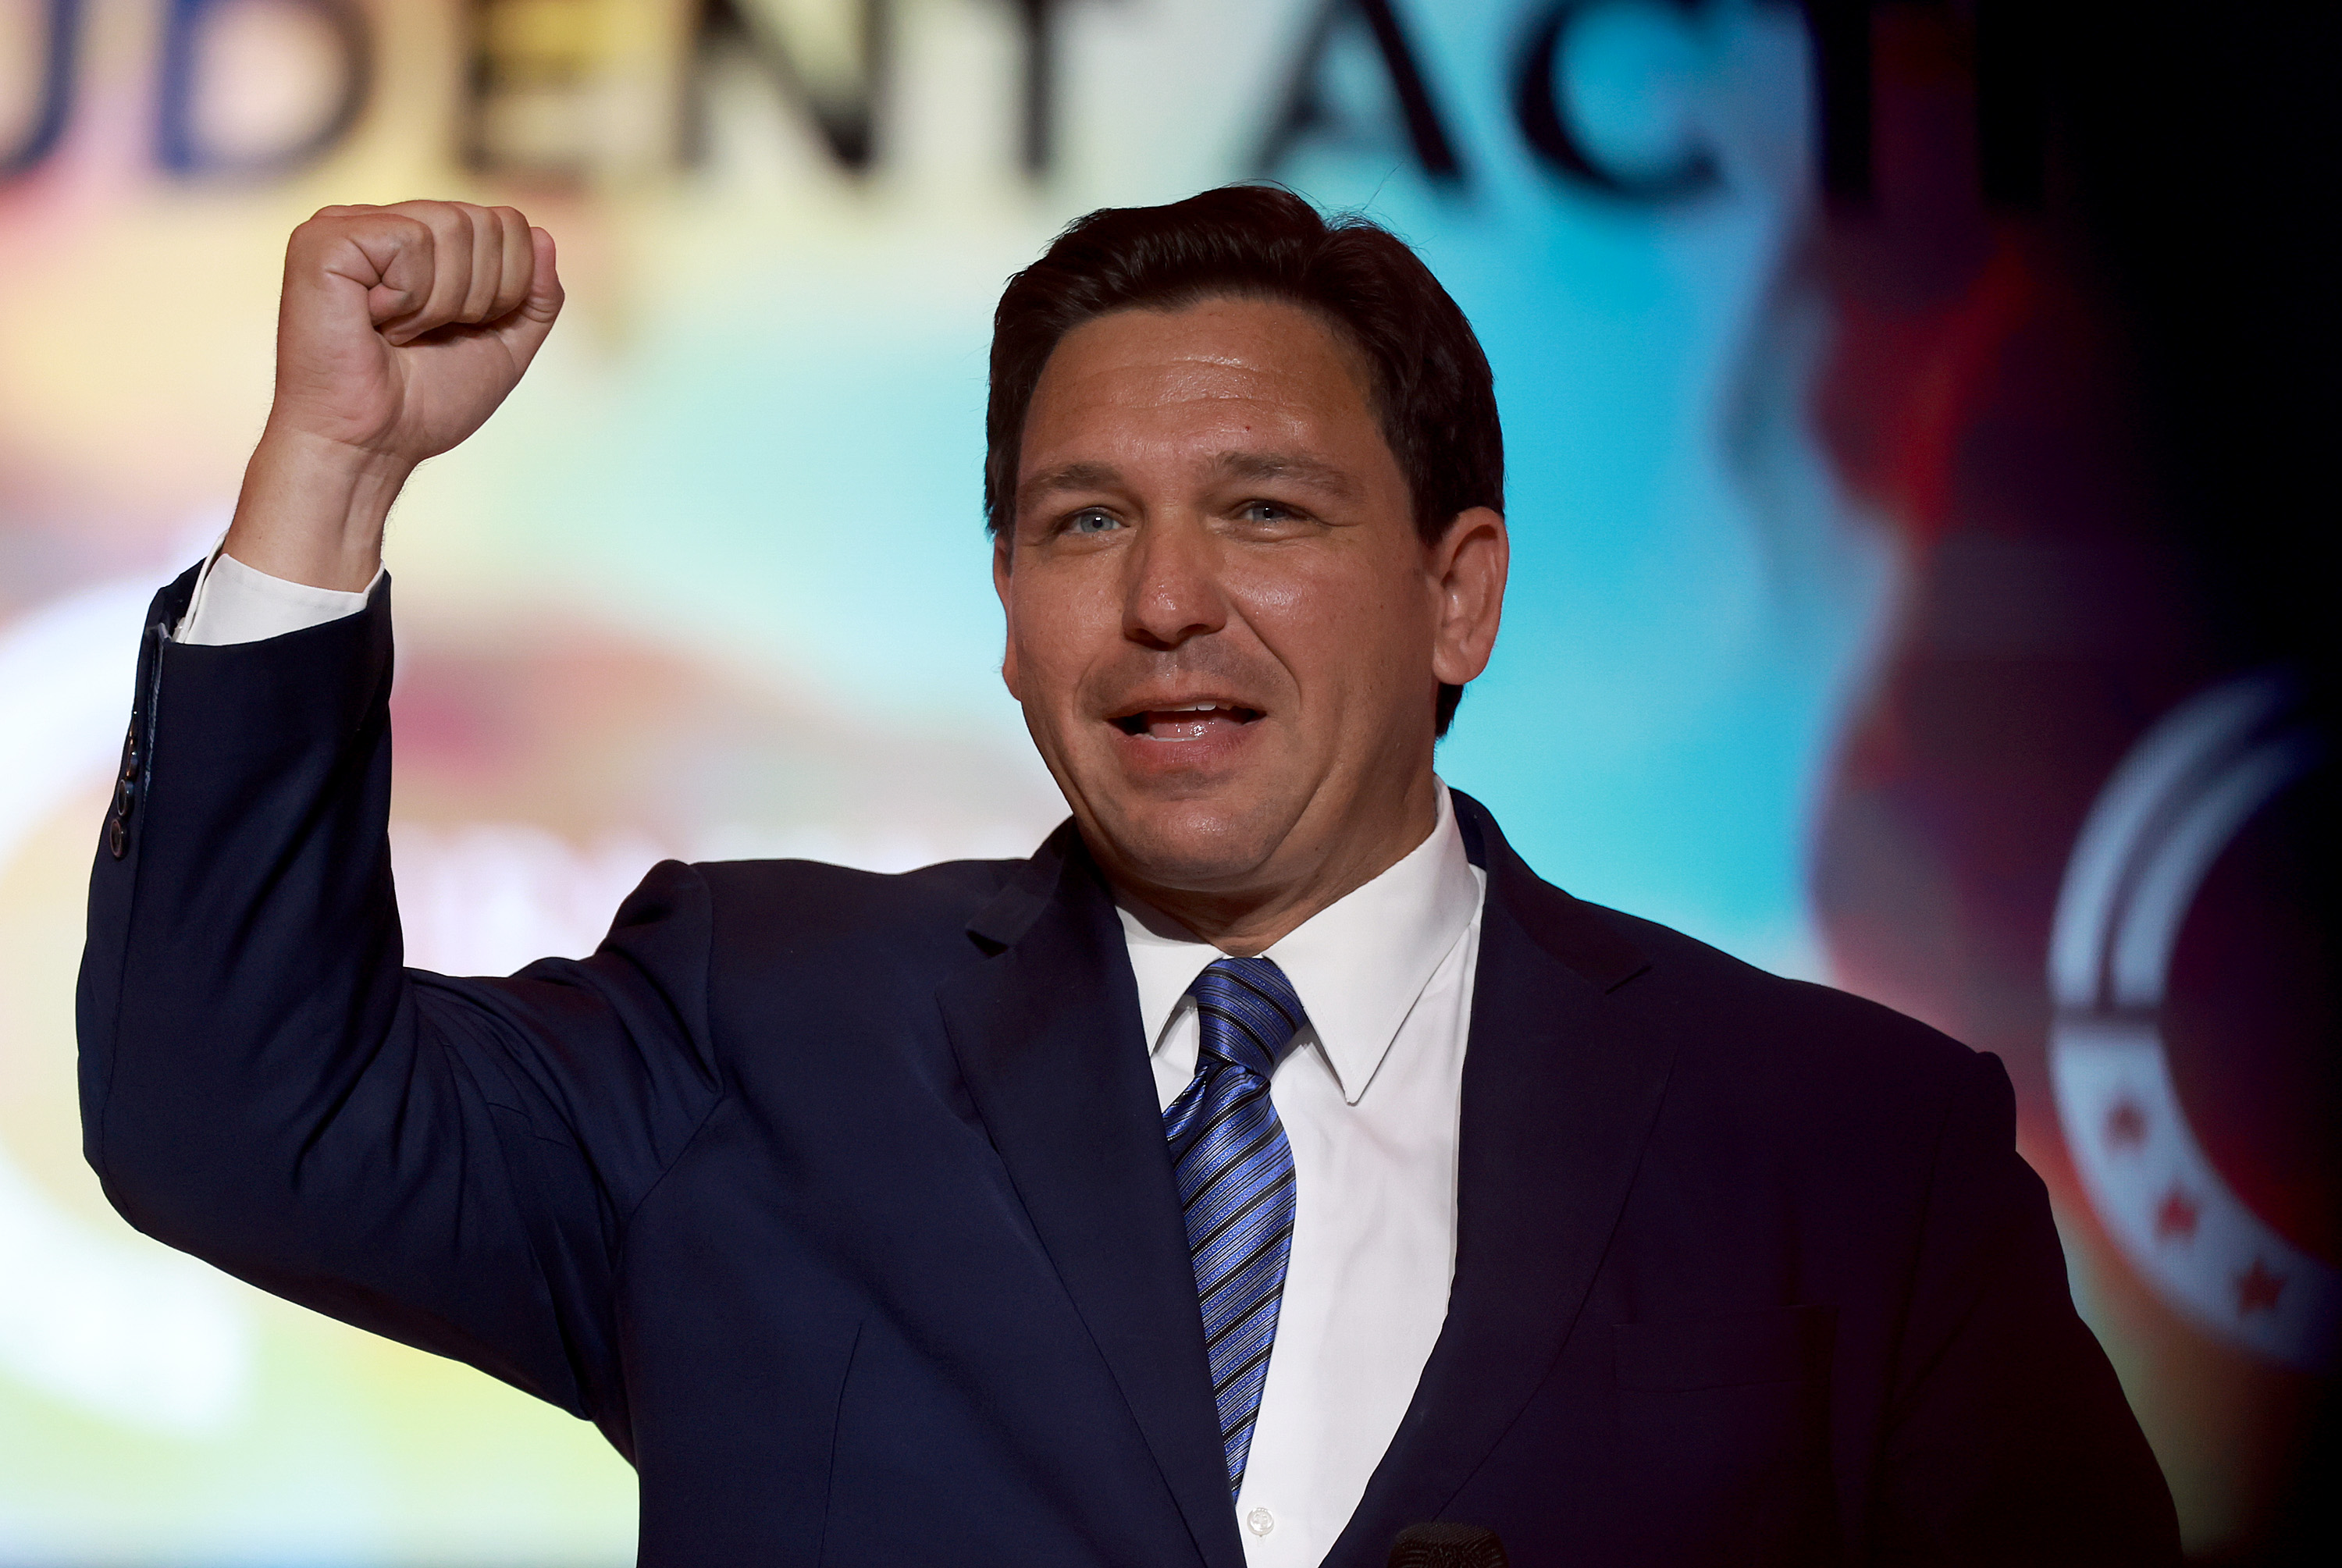 Gov. Ron DeSantis speaks during an event in July in Tampa, Florida.